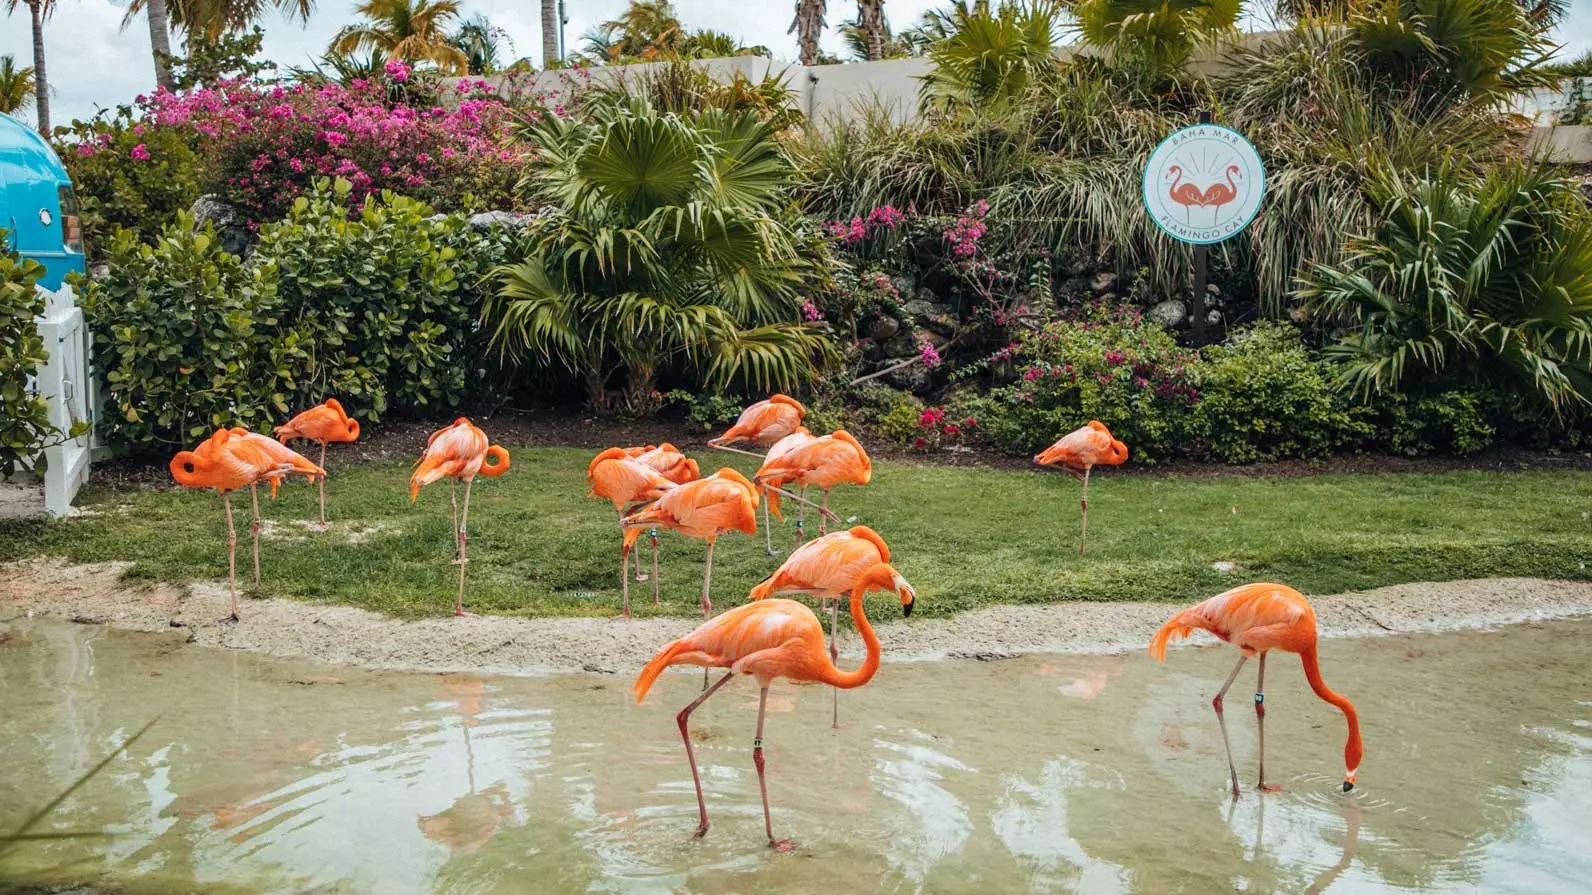 You Can Do Yoga With Flamingos At This Jaw-Dropping Bahamas Resort